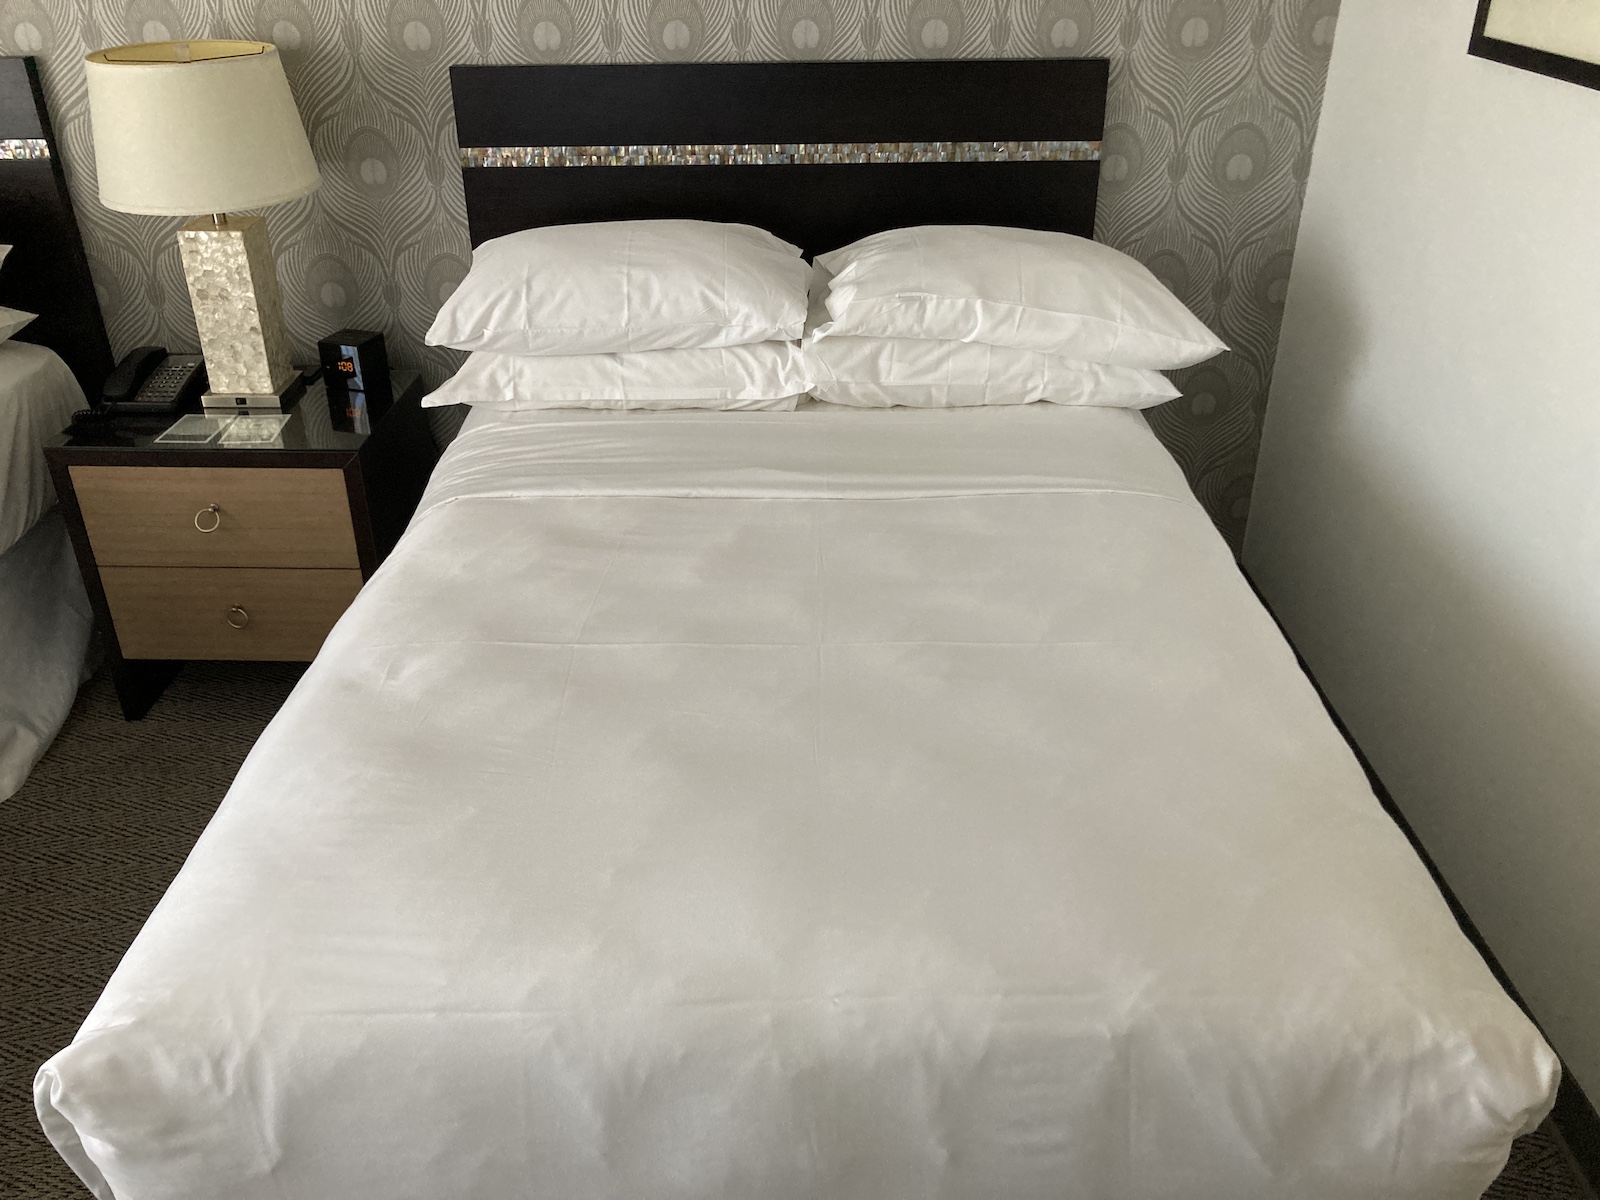 Picture of a hotel bed with pillows on it